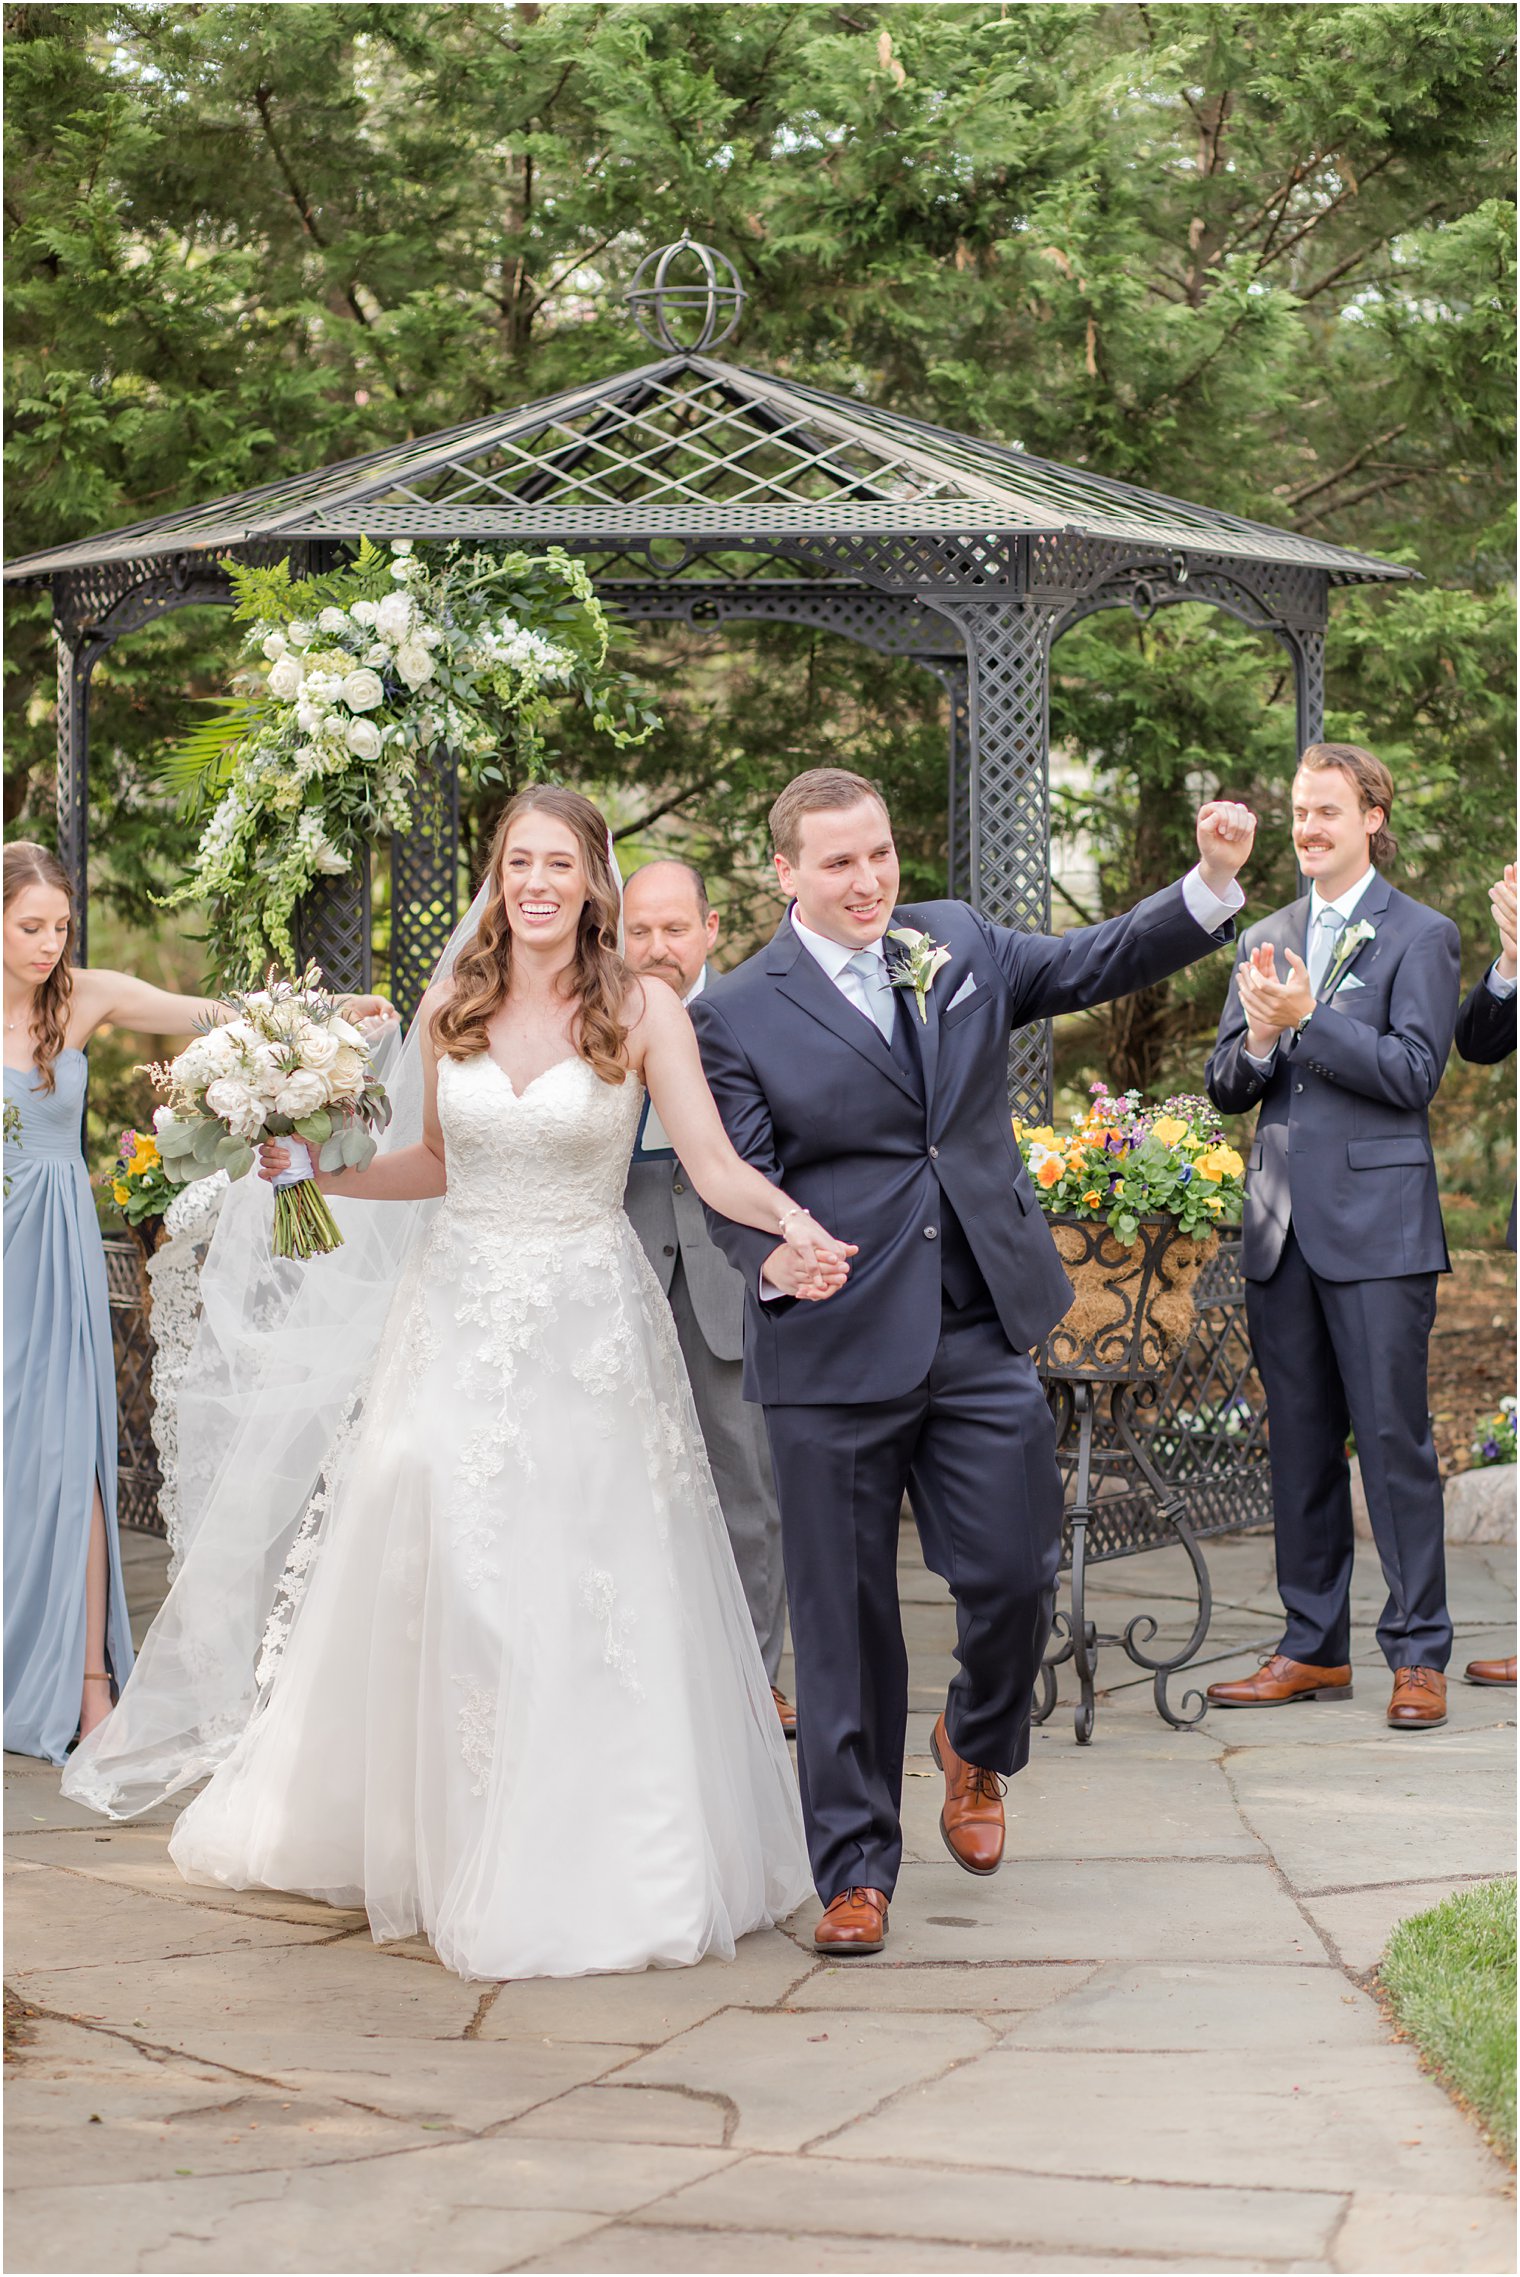 newlyweds cheer and wave to guests at garden wedding ceremony 